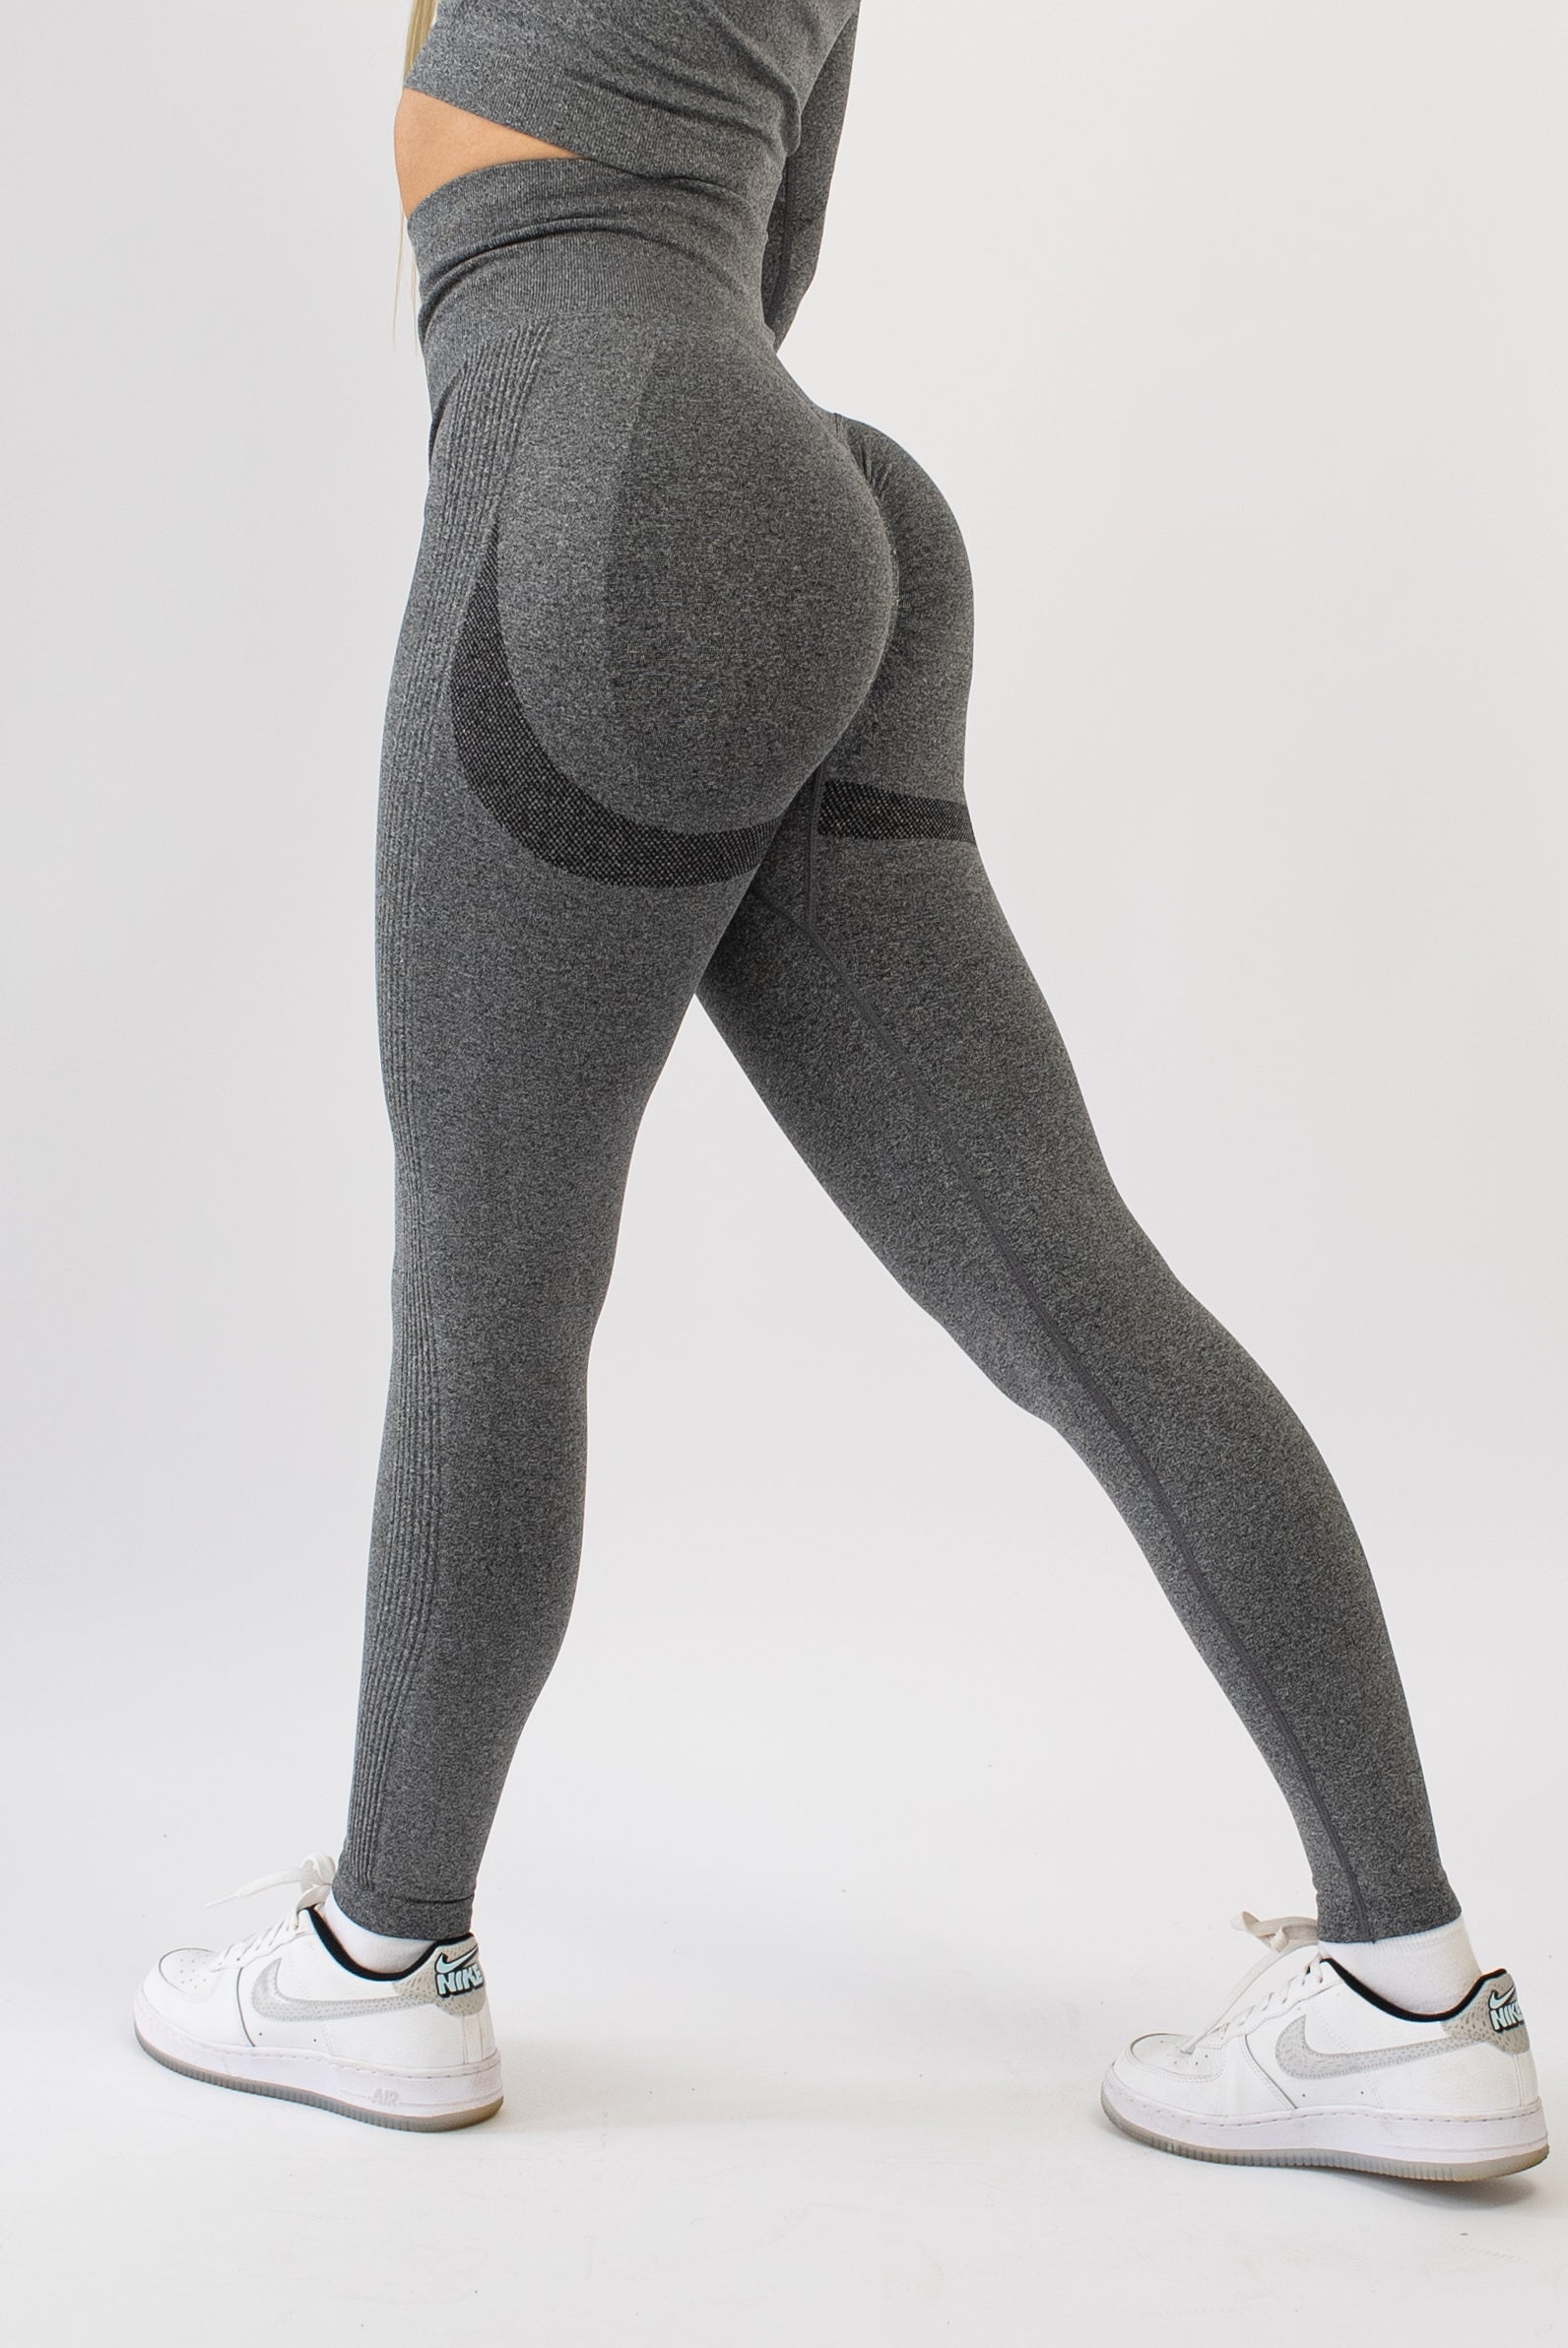 High Waist Ruched Yoga Black Workout Leggings For Women Scrunch Bum Fitness  Pants For Gym, Workouts, And Athletic Wear Booty Butt Design From Mfcd,  $16.6 | DHgate.Com